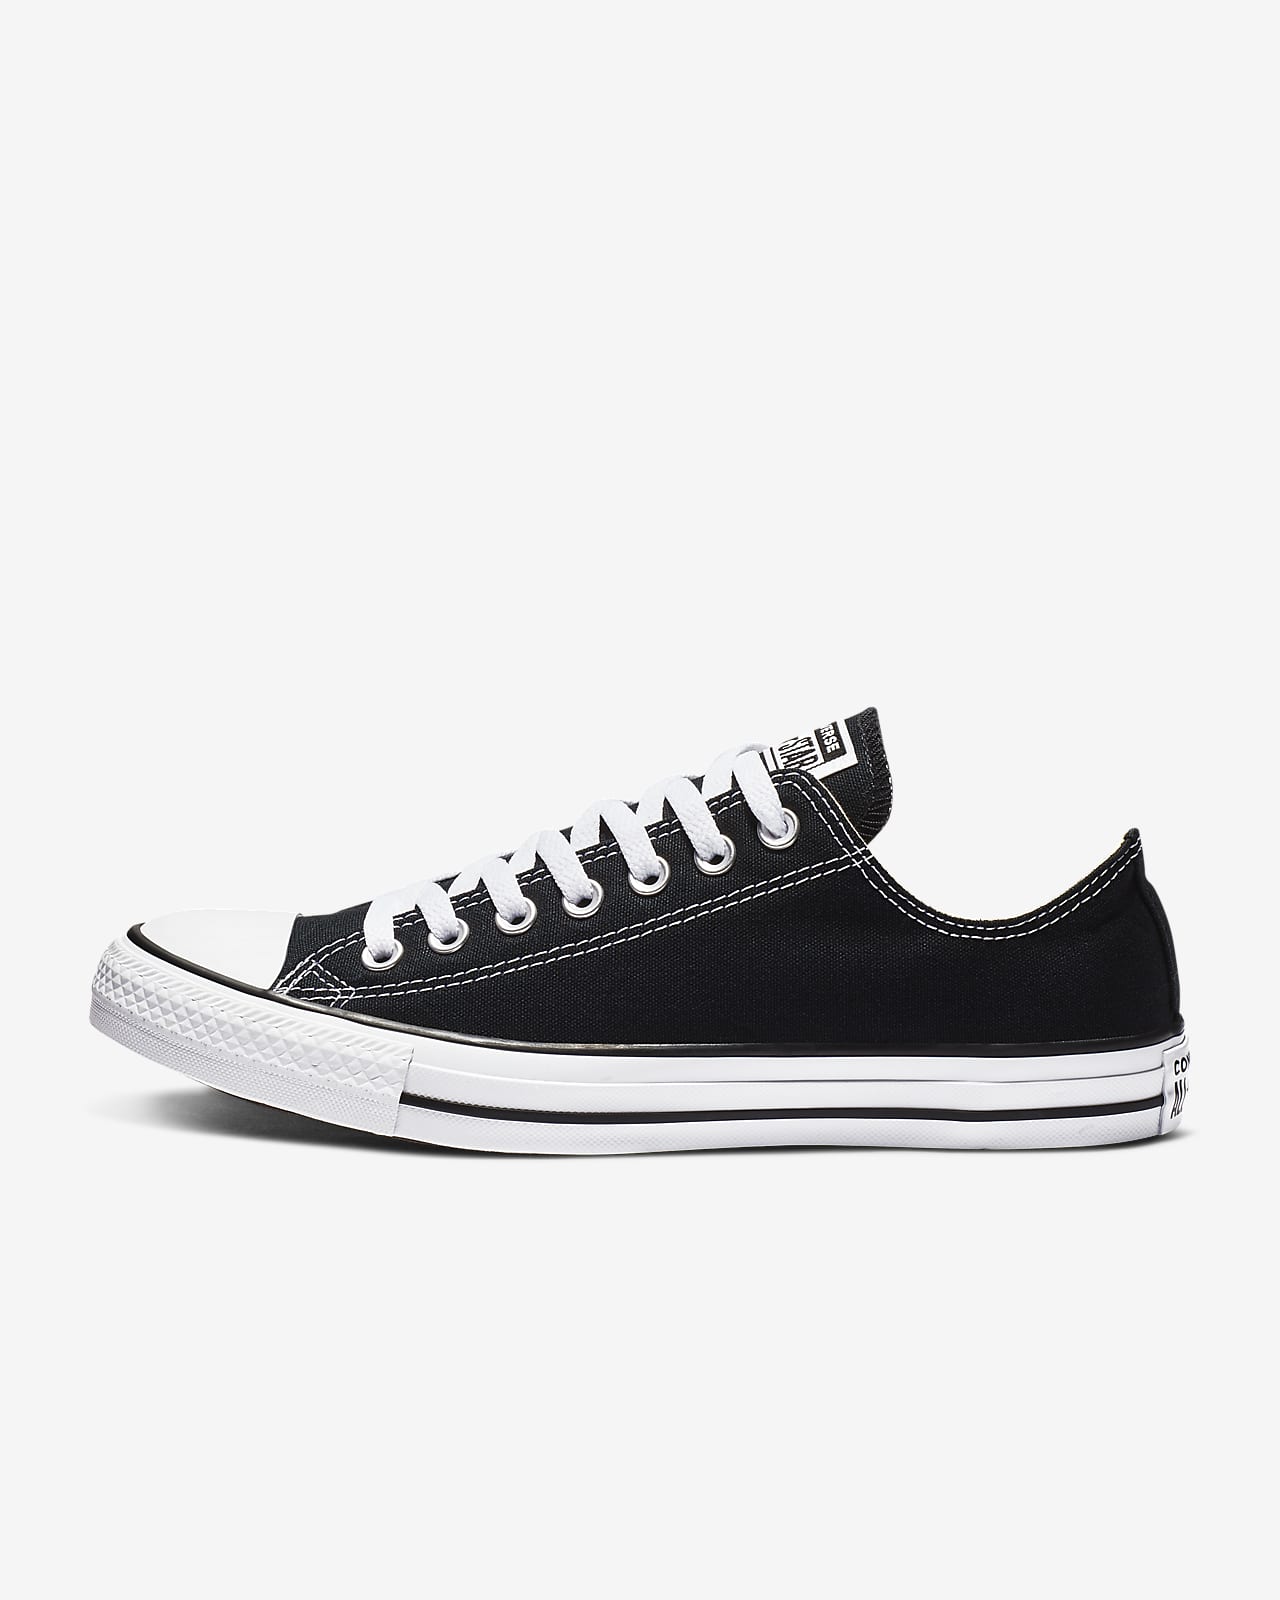 Converse Chuck Taylor All Star Low Top Shoes سعر زيت بترومين